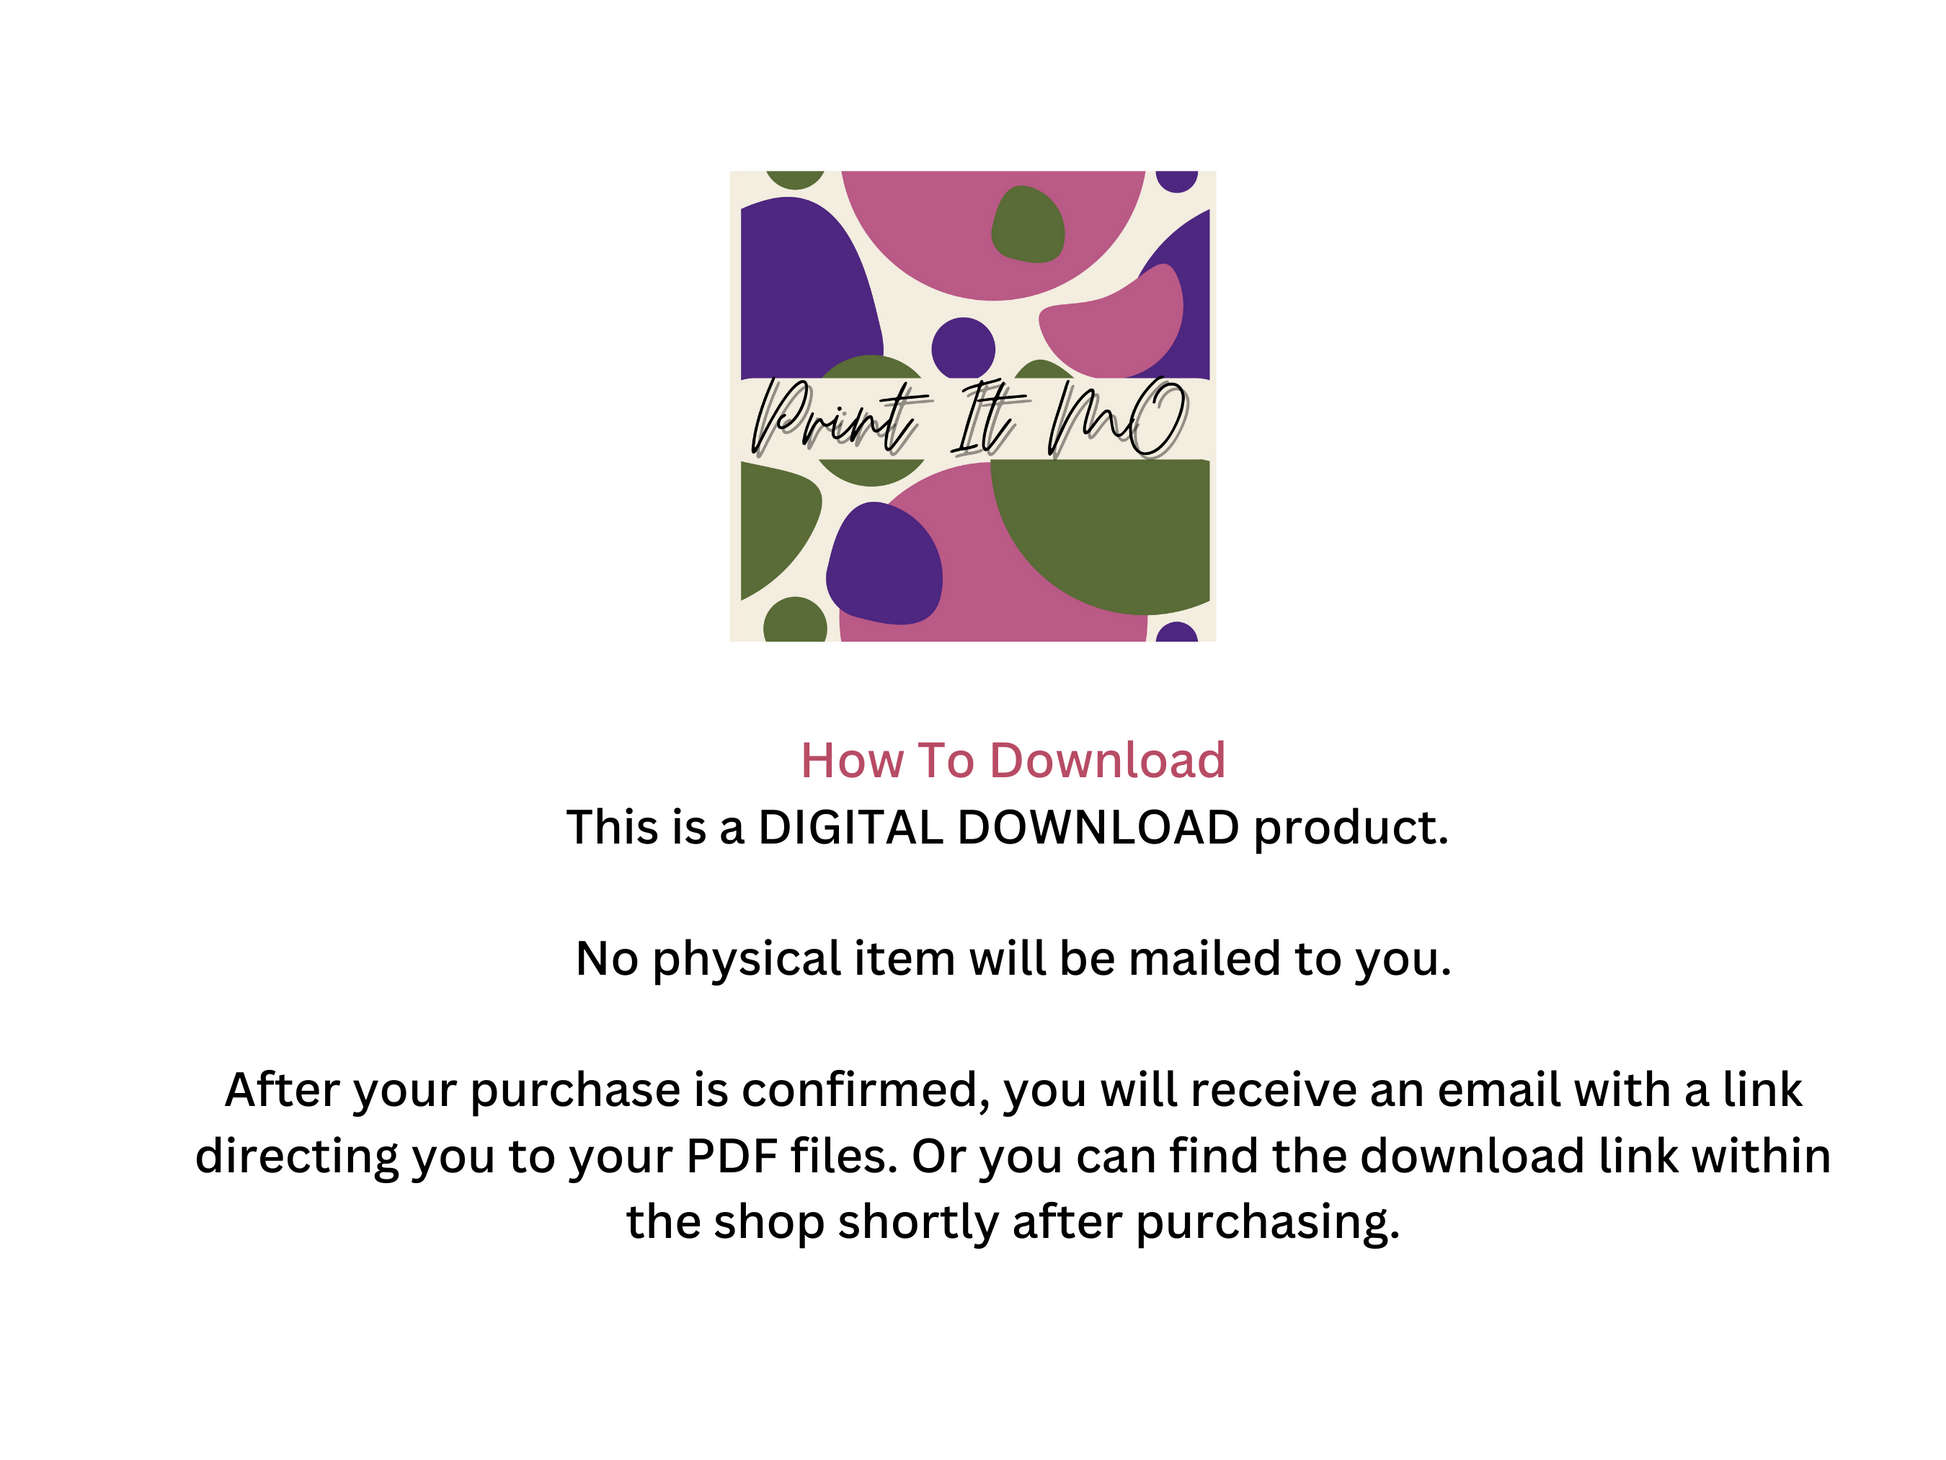 Print It Mo logo with a message on how to download product